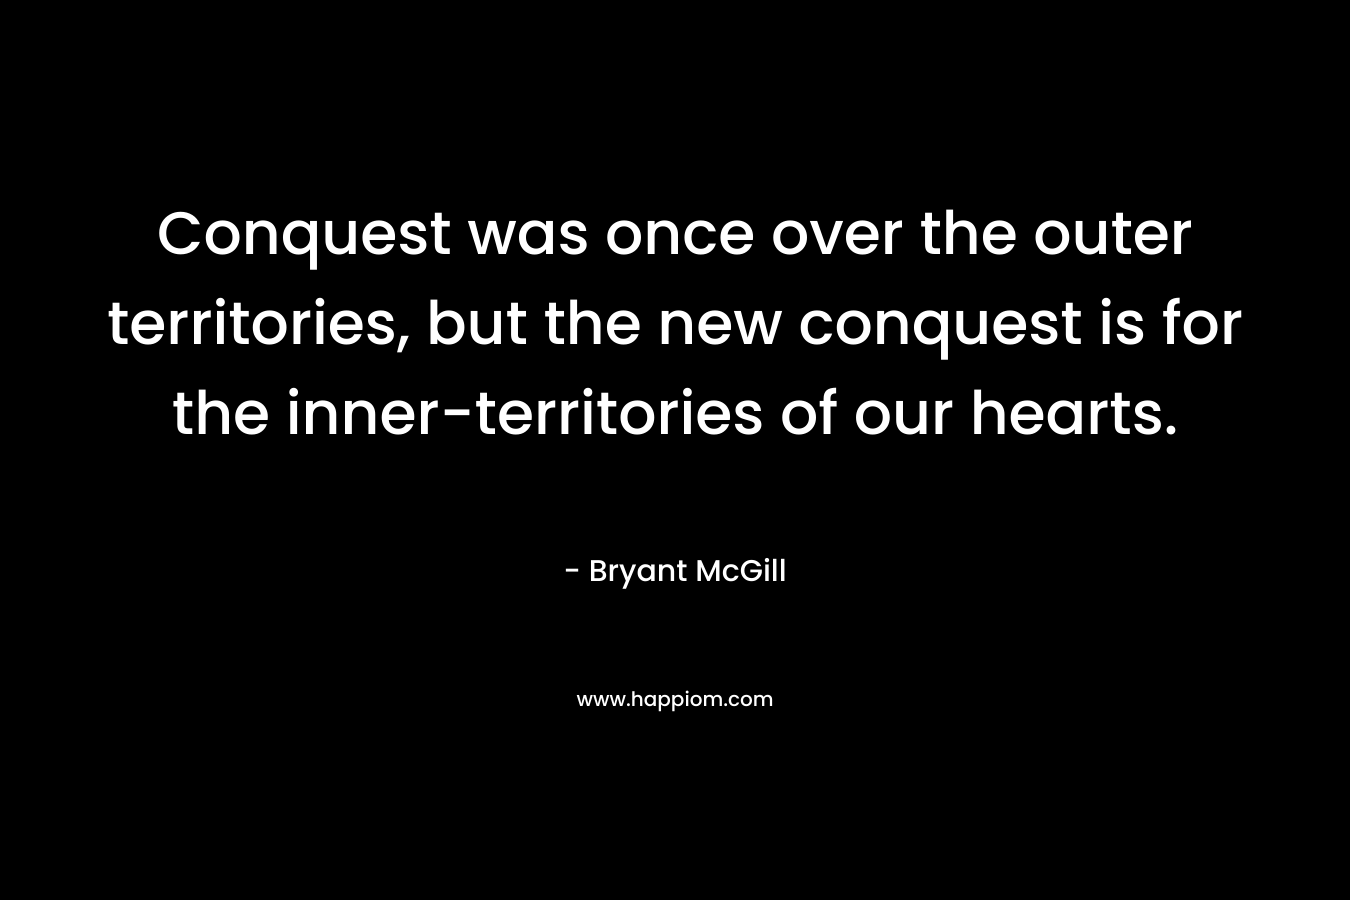 Conquest was once over the outer territories, but the new conquest is for the inner-territories of our hearts. – Bryant McGill